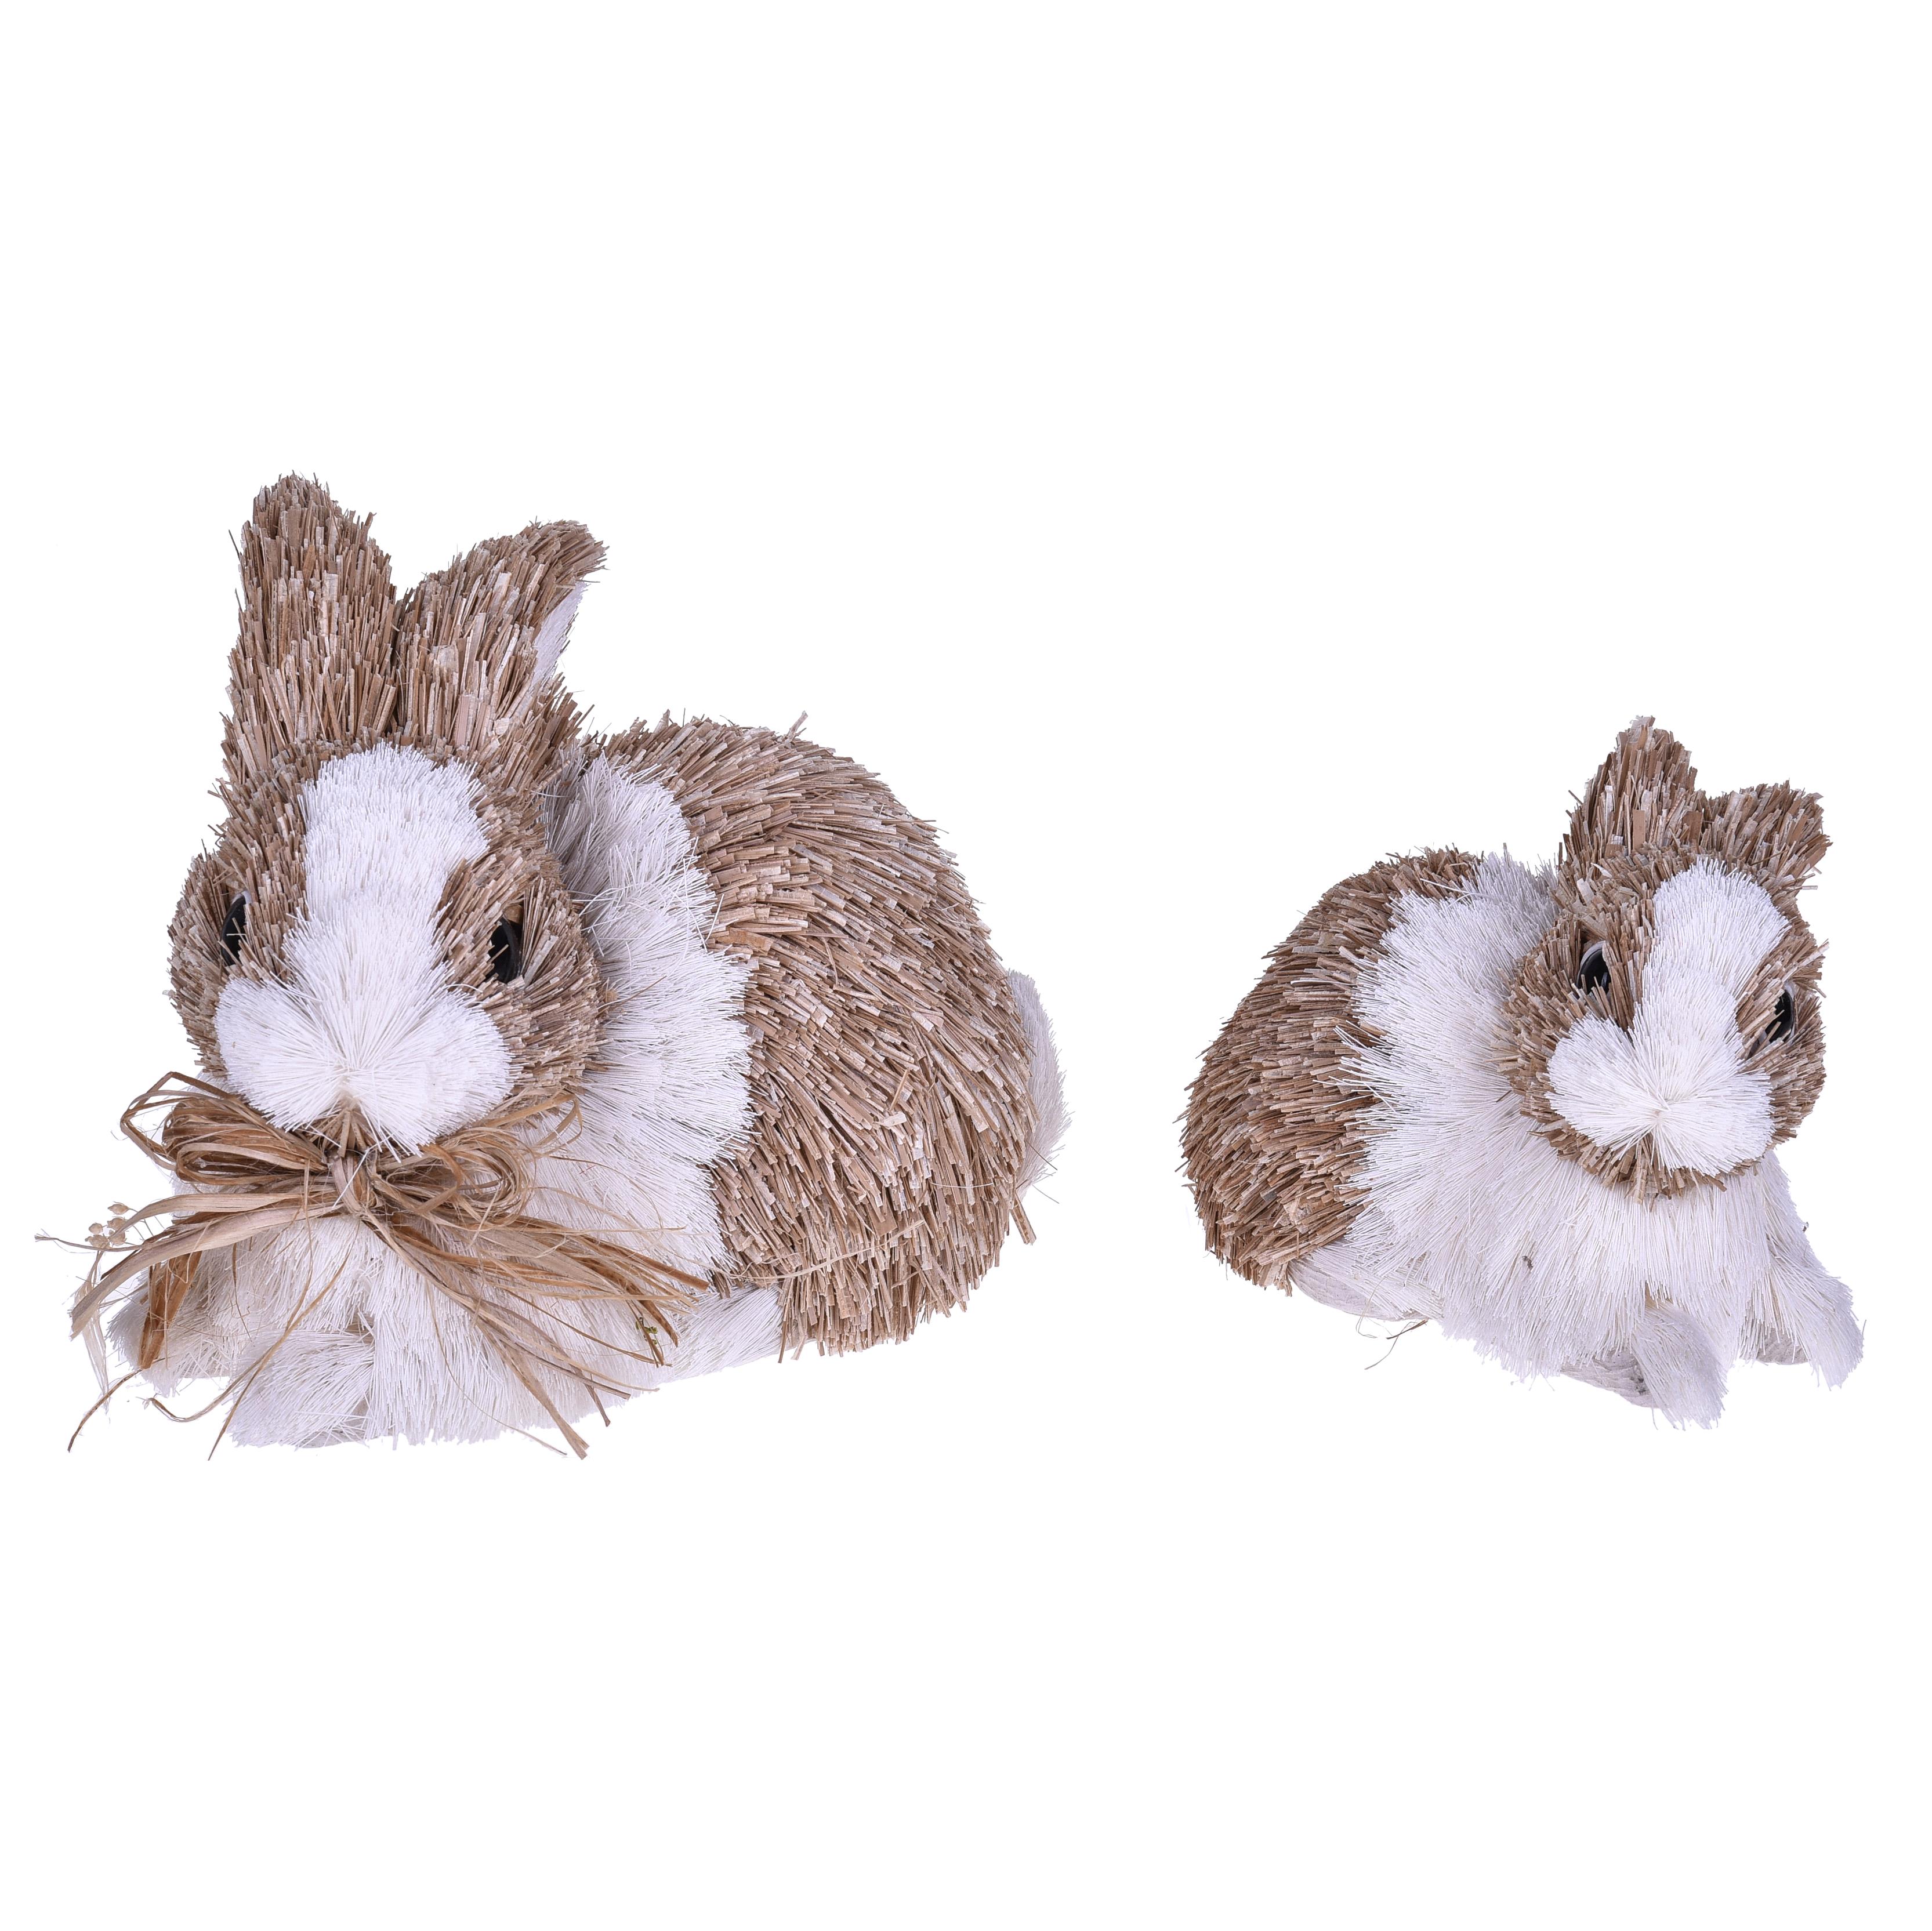 SPRING AND EASTER DECORATIONS, Easter subjects, rabbits, hens, sheep ect., SET/2 CONIGLI PAGLIA 11,50 CM